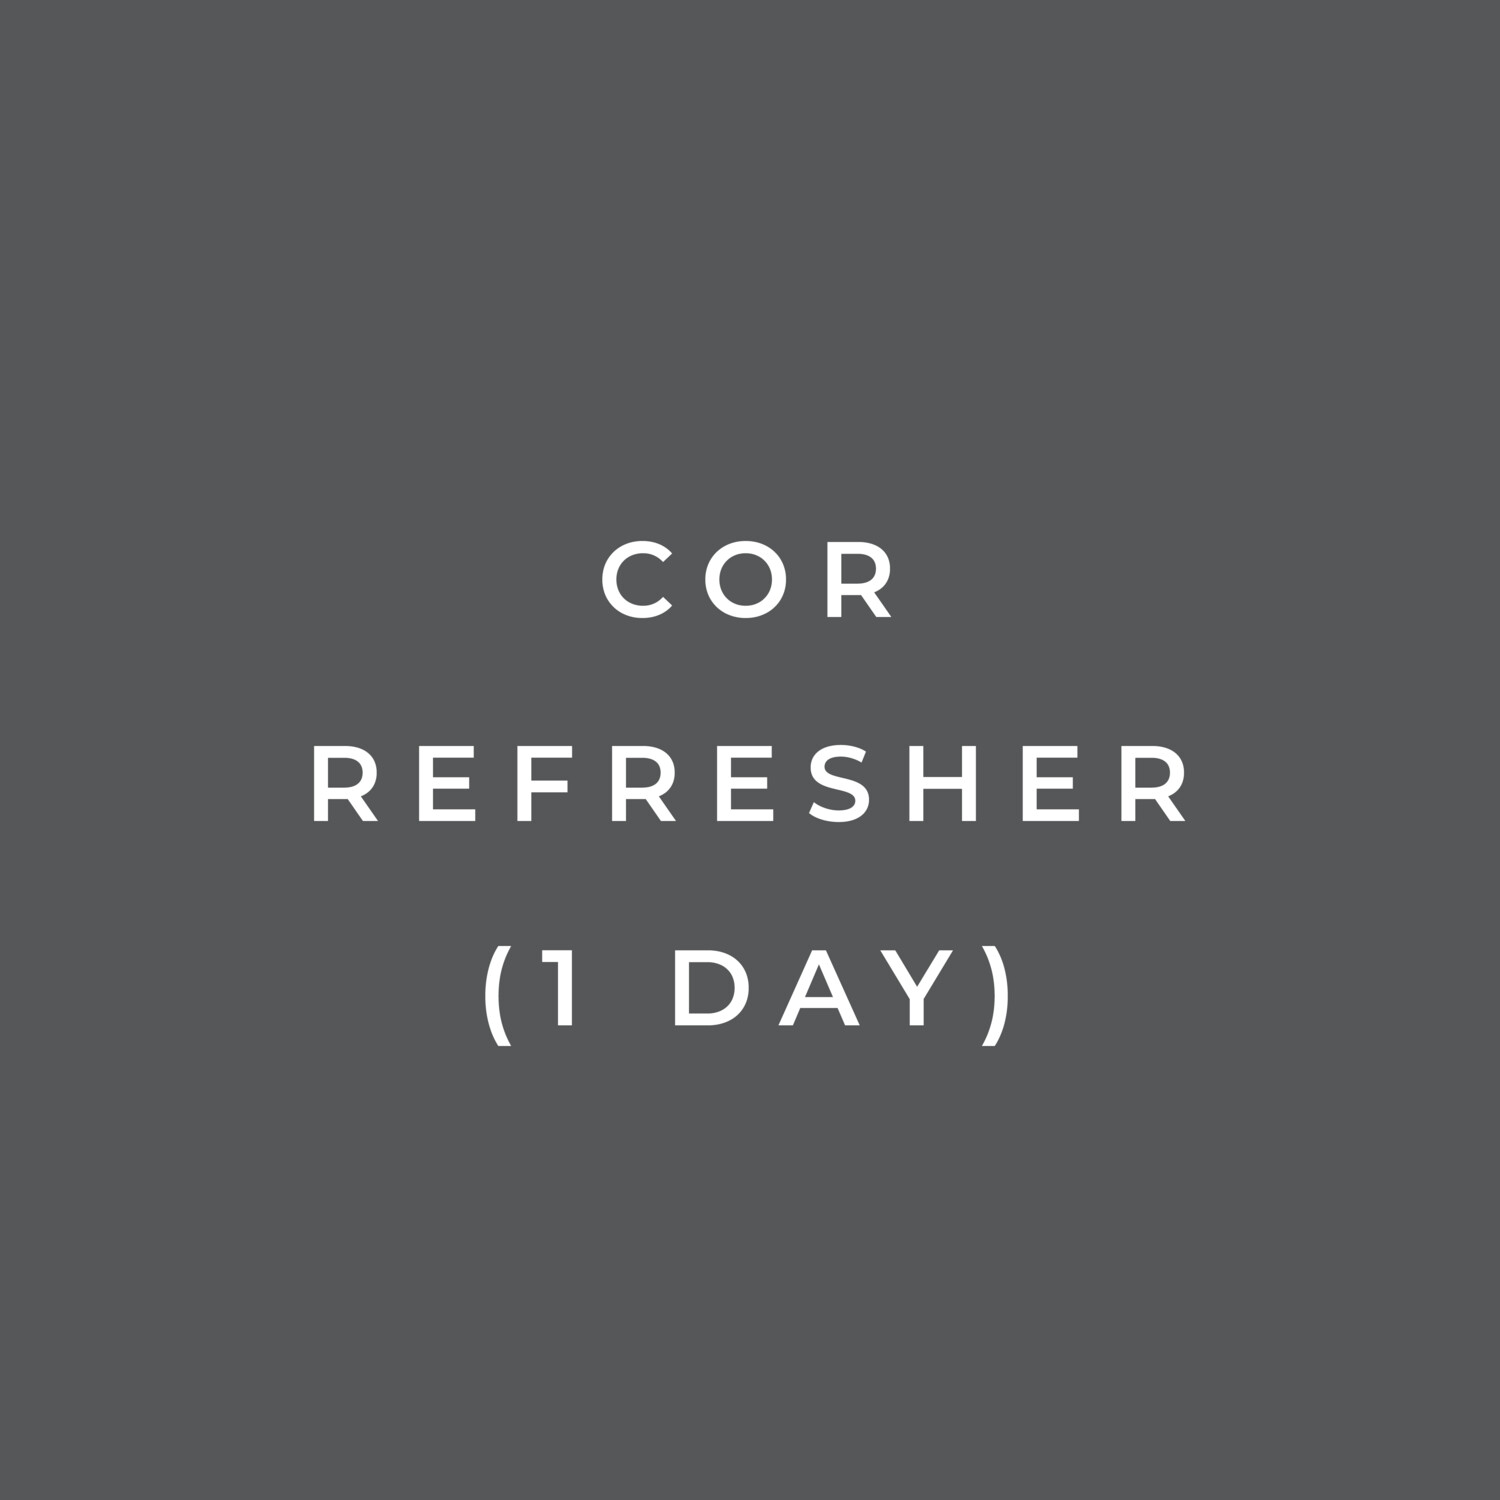 COR Refresher (1 Day): Contracting Officer Representative (COR) Refresher